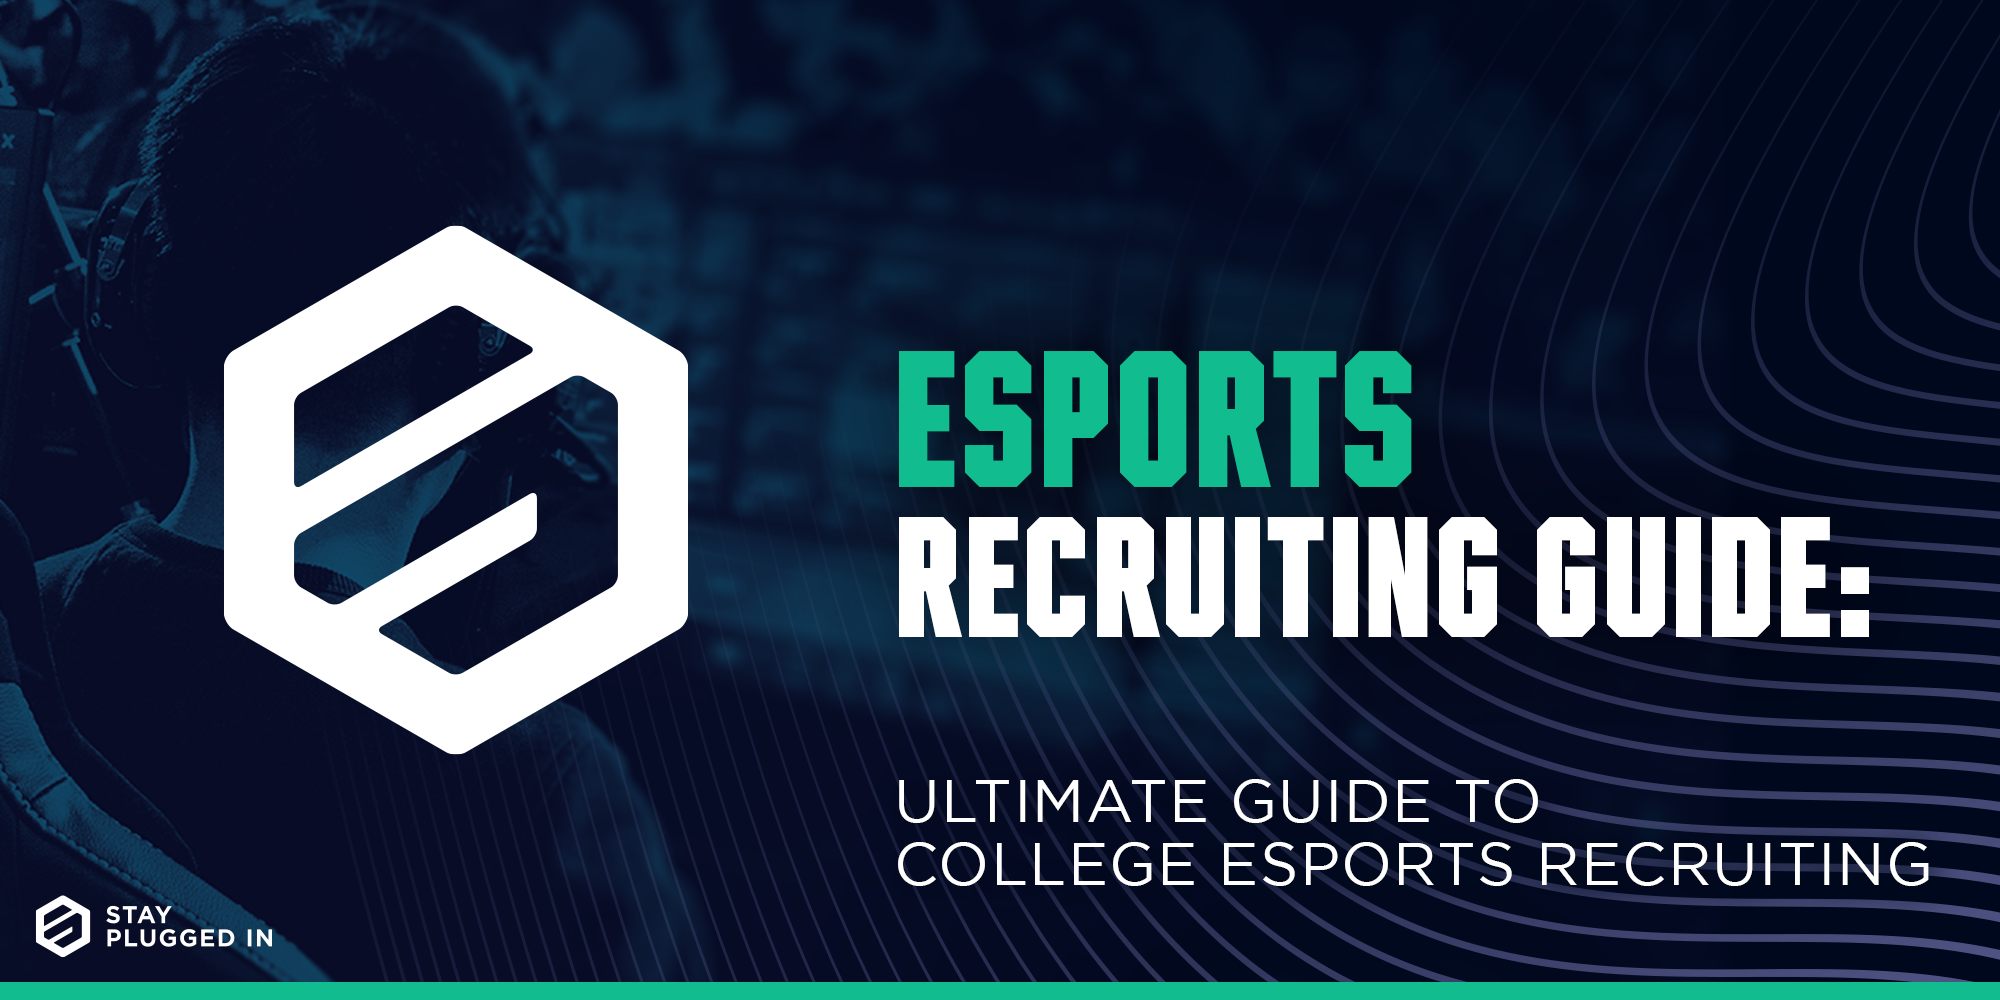 College Esports Recruiting: The Ultimate Guide to Finding College Esports Opportunities